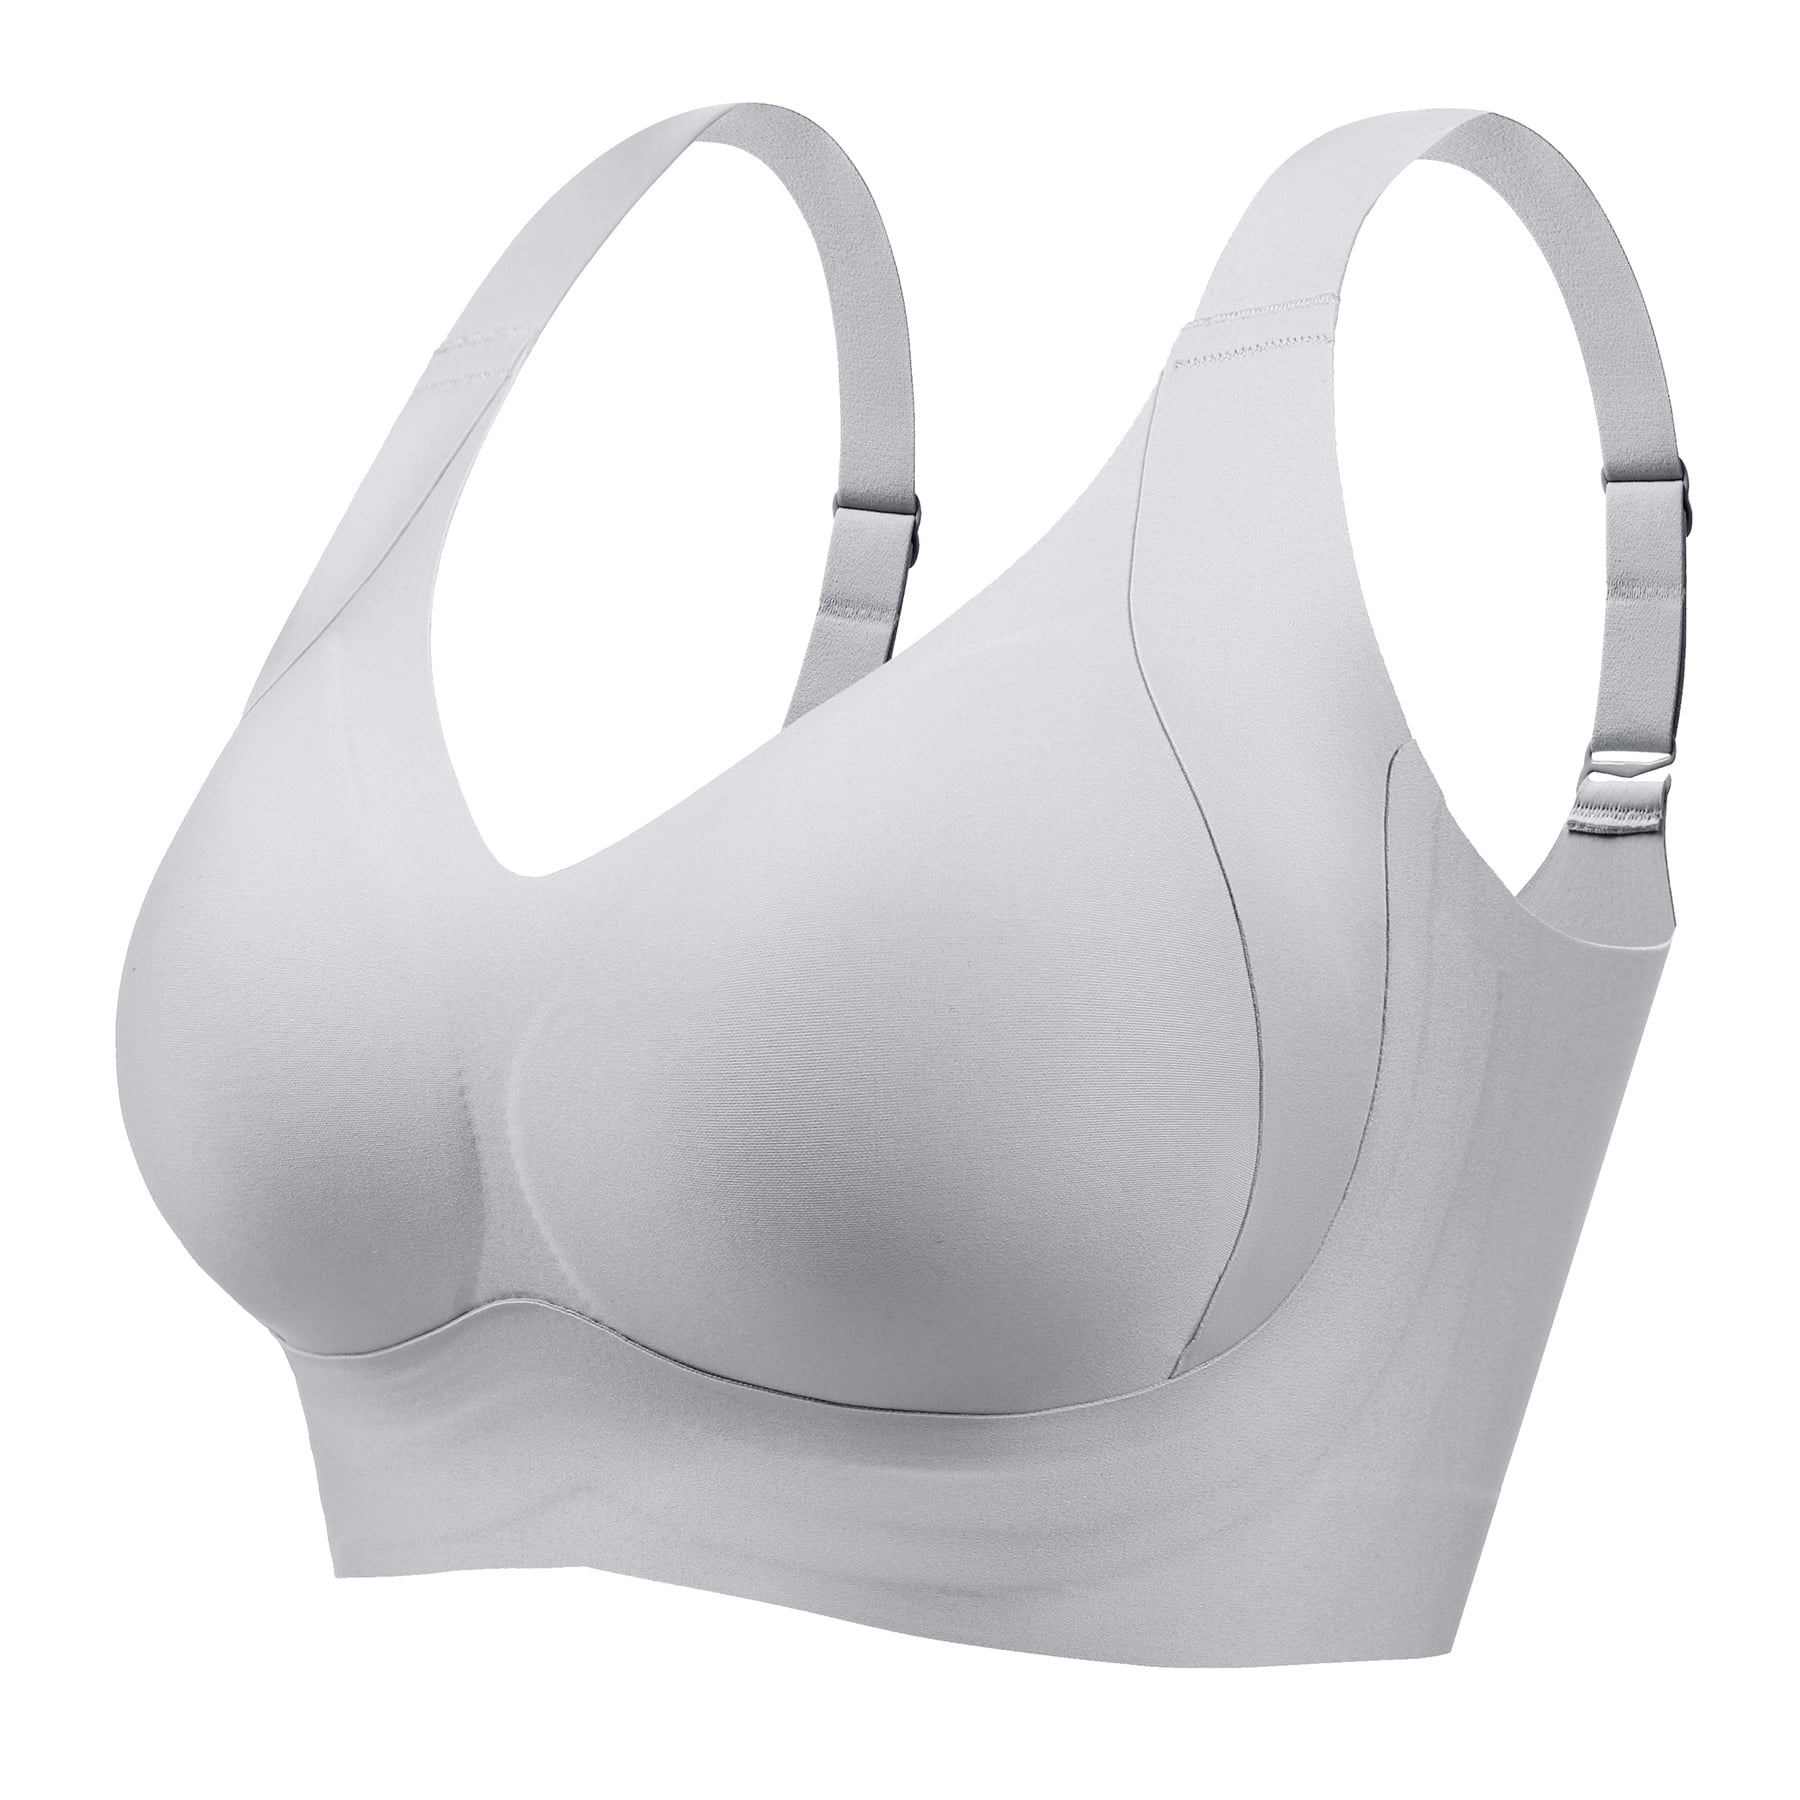 Charnos Womens Rosalind Side Support Comfort Bra Style-116501 